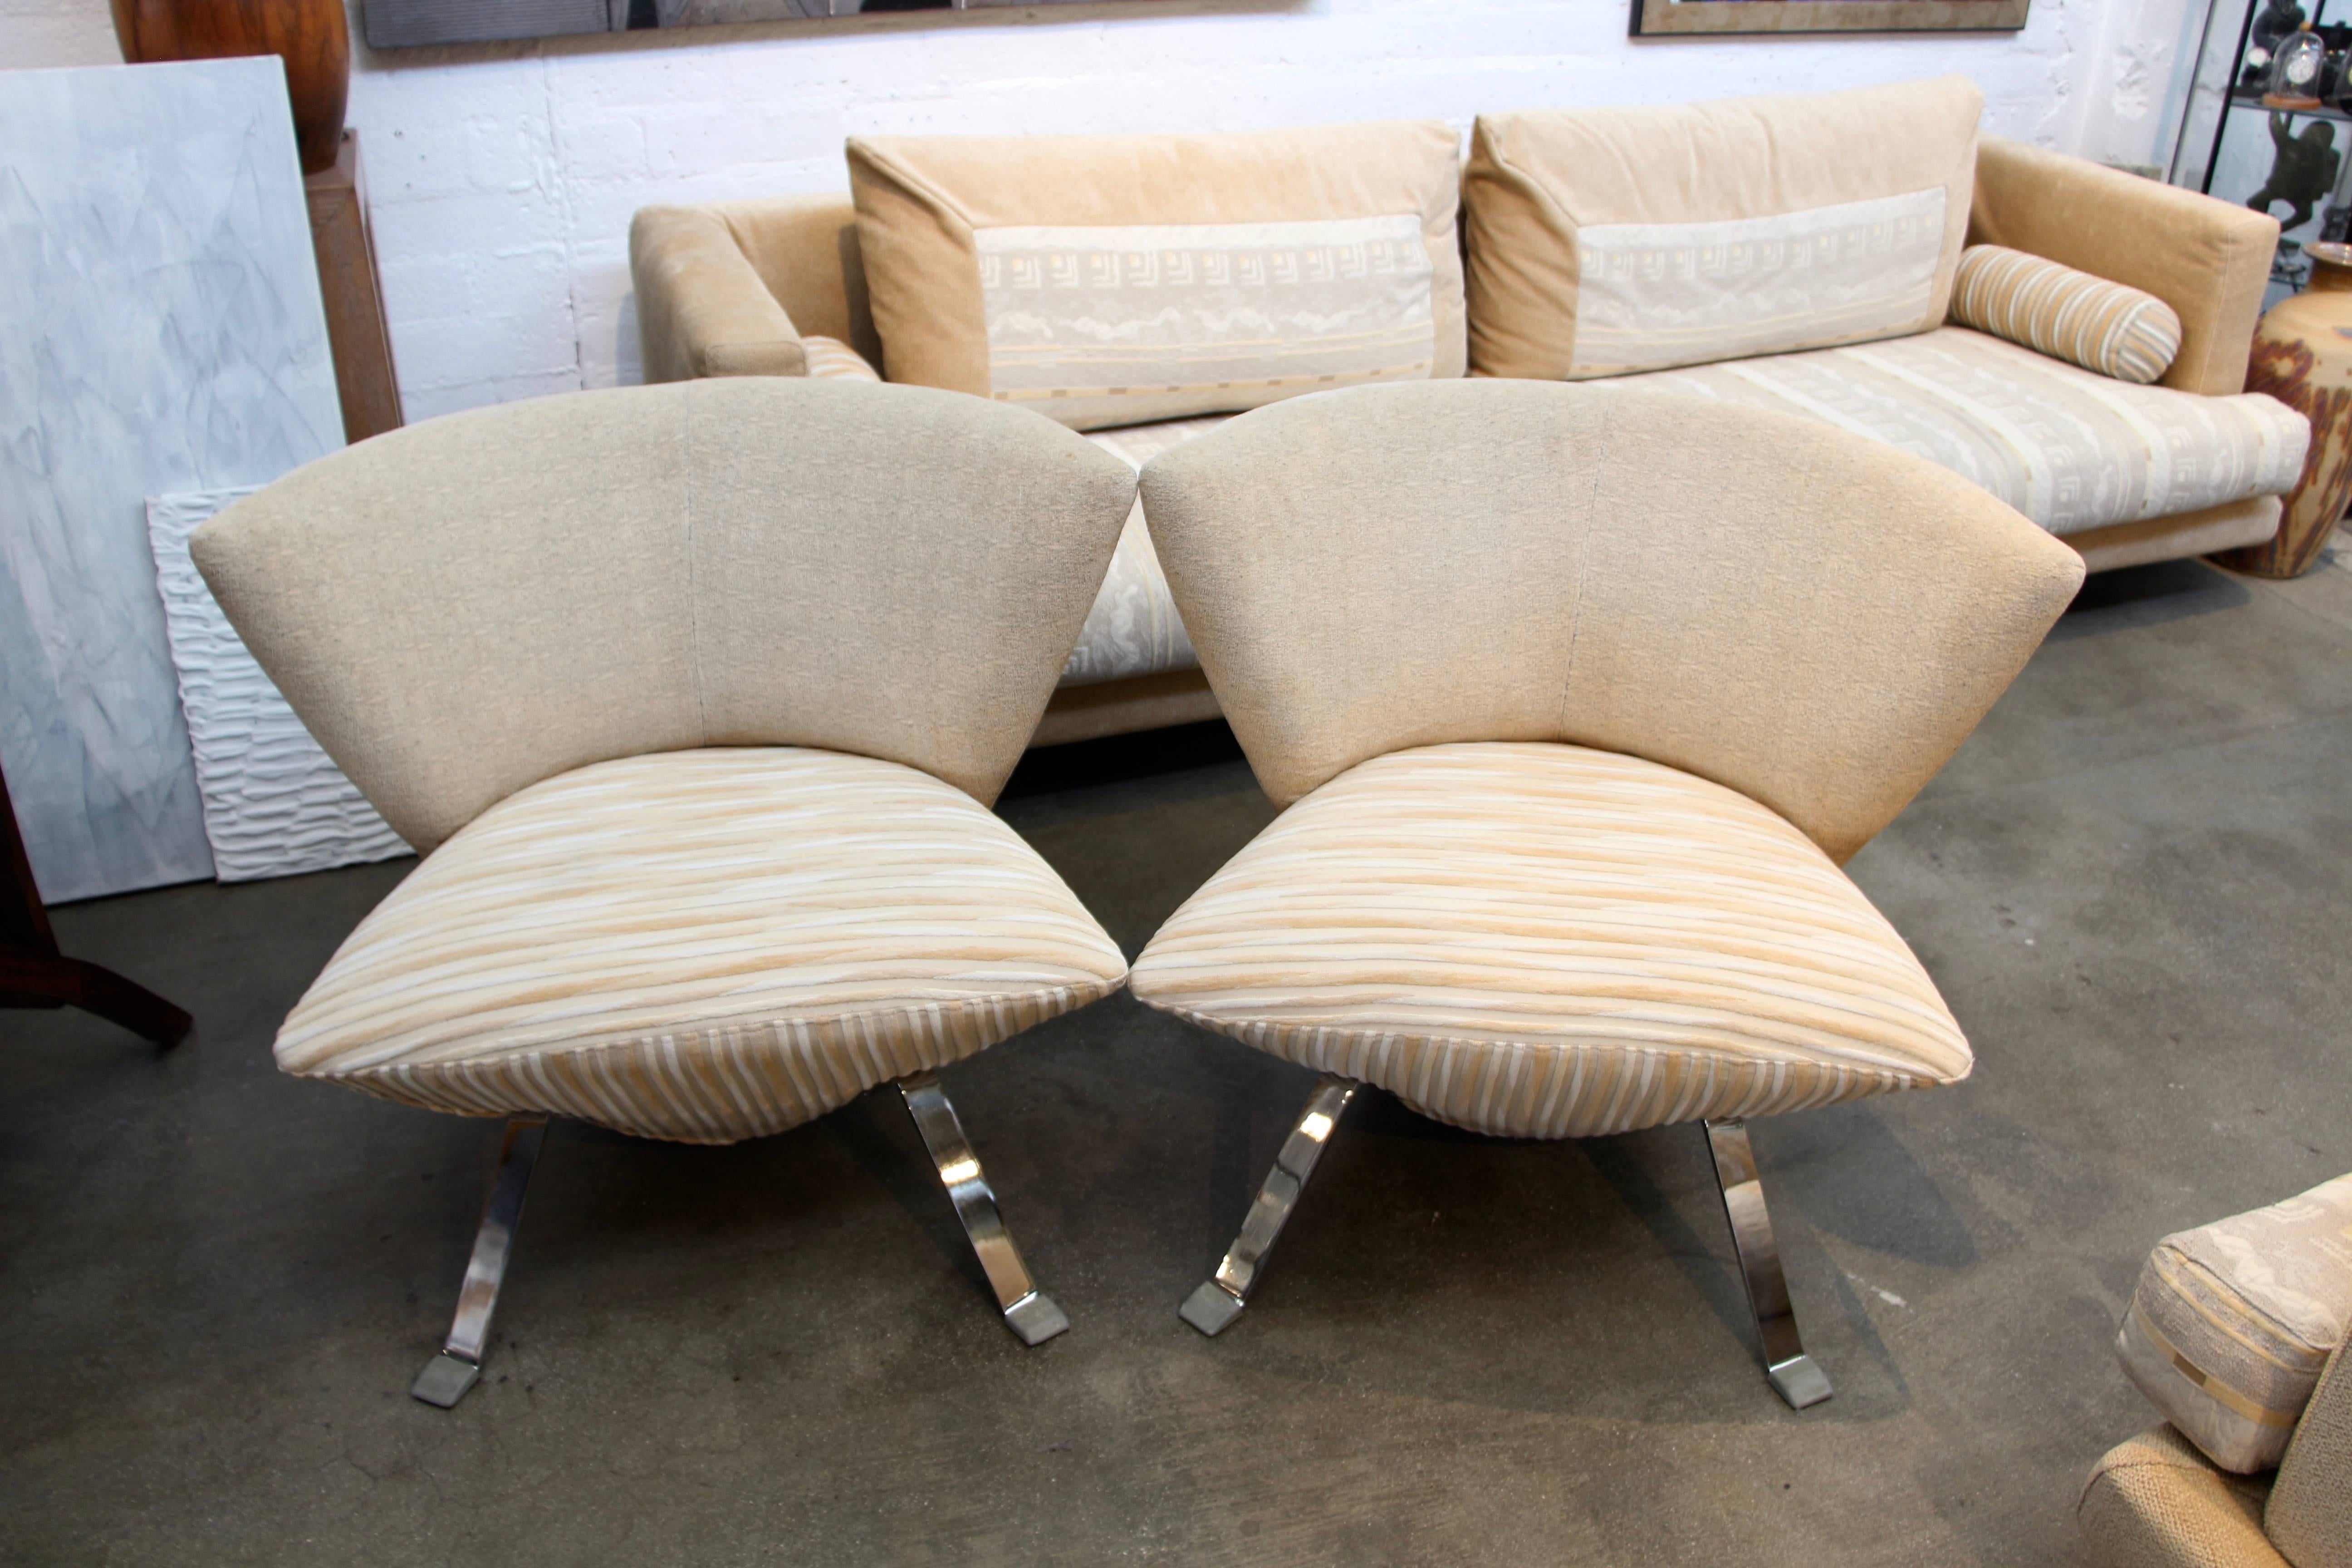 A pretty pair of chairs designed by Giorgio Saporiti for his firm IL Loft. They are quite comfortable in the original fabric from the factory. There are some minor imperfections and the fabric may have some imperfections that we missed. There is one